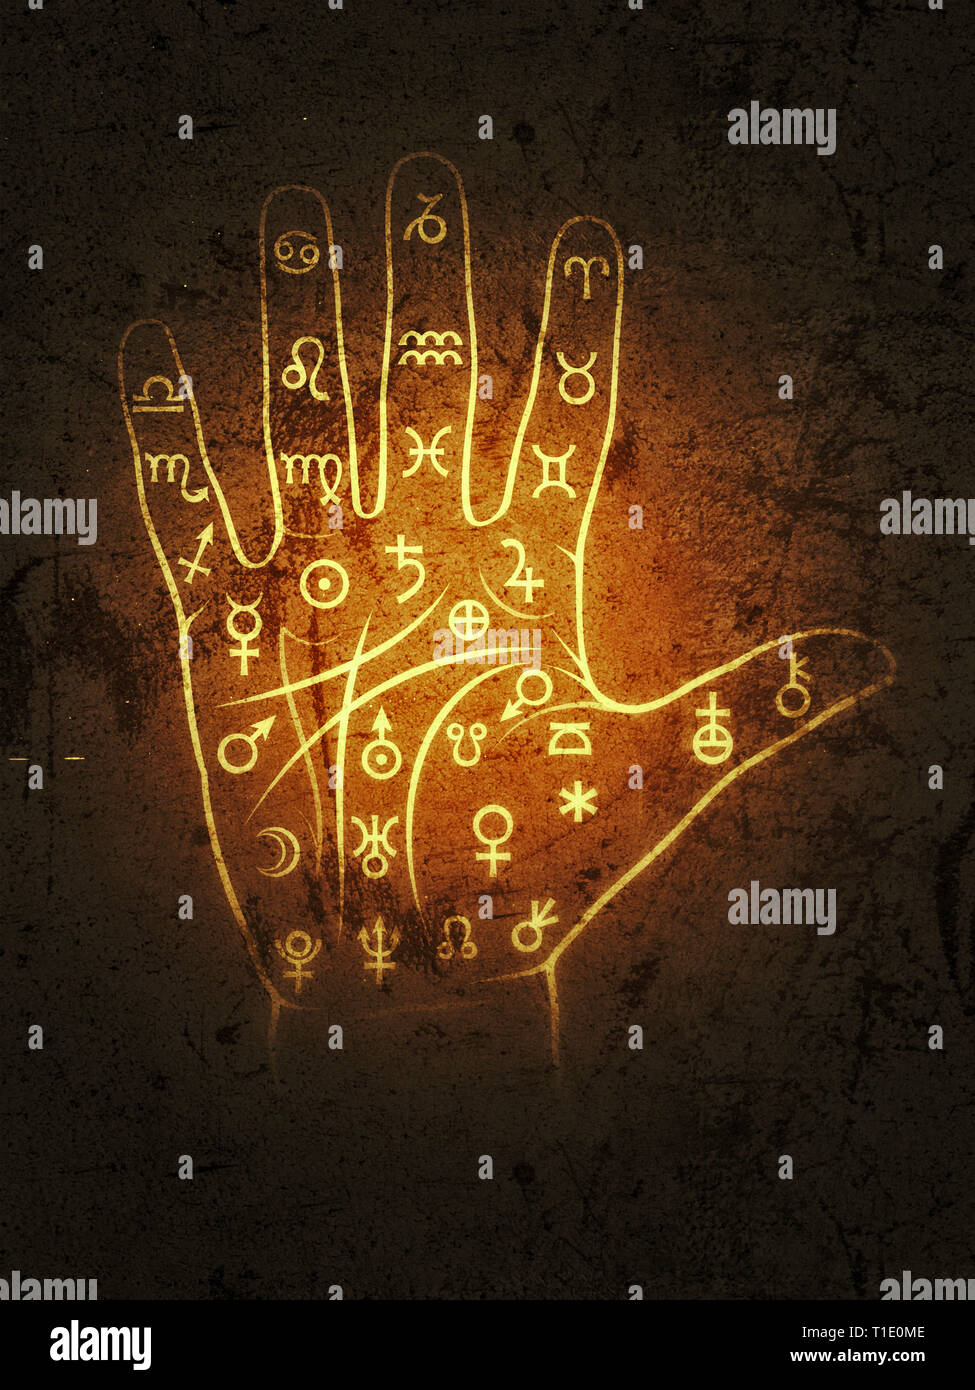 The Art of Black Magic: Chiromancy & Palmistry. Mystical chart with Ancient hieroglyphs, Medieval runes, Astrological signs and Alchemical symbols. Stock Photo